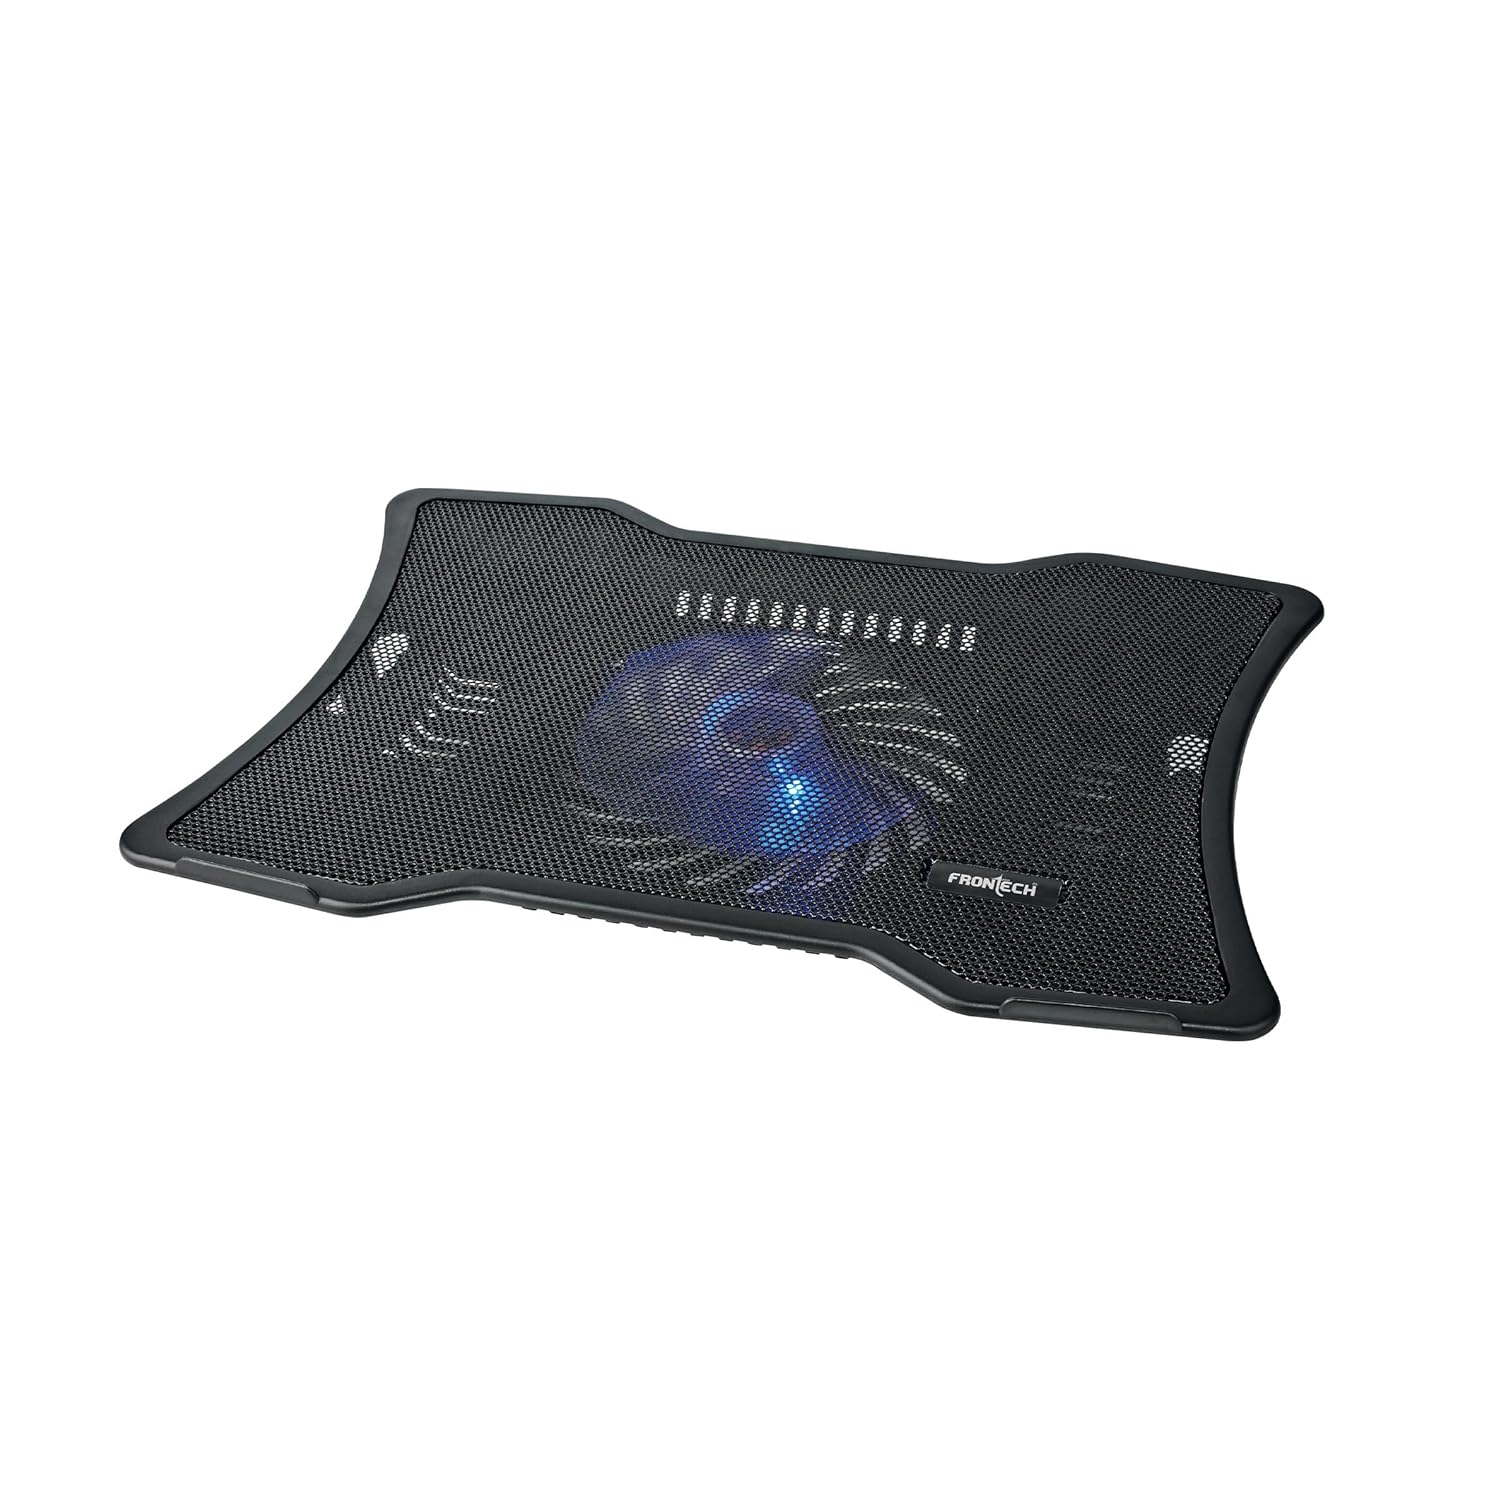 Frontech Cooling Pad for Laptops | Adjustable Viewing Angle, LED Lights (CP-0004)